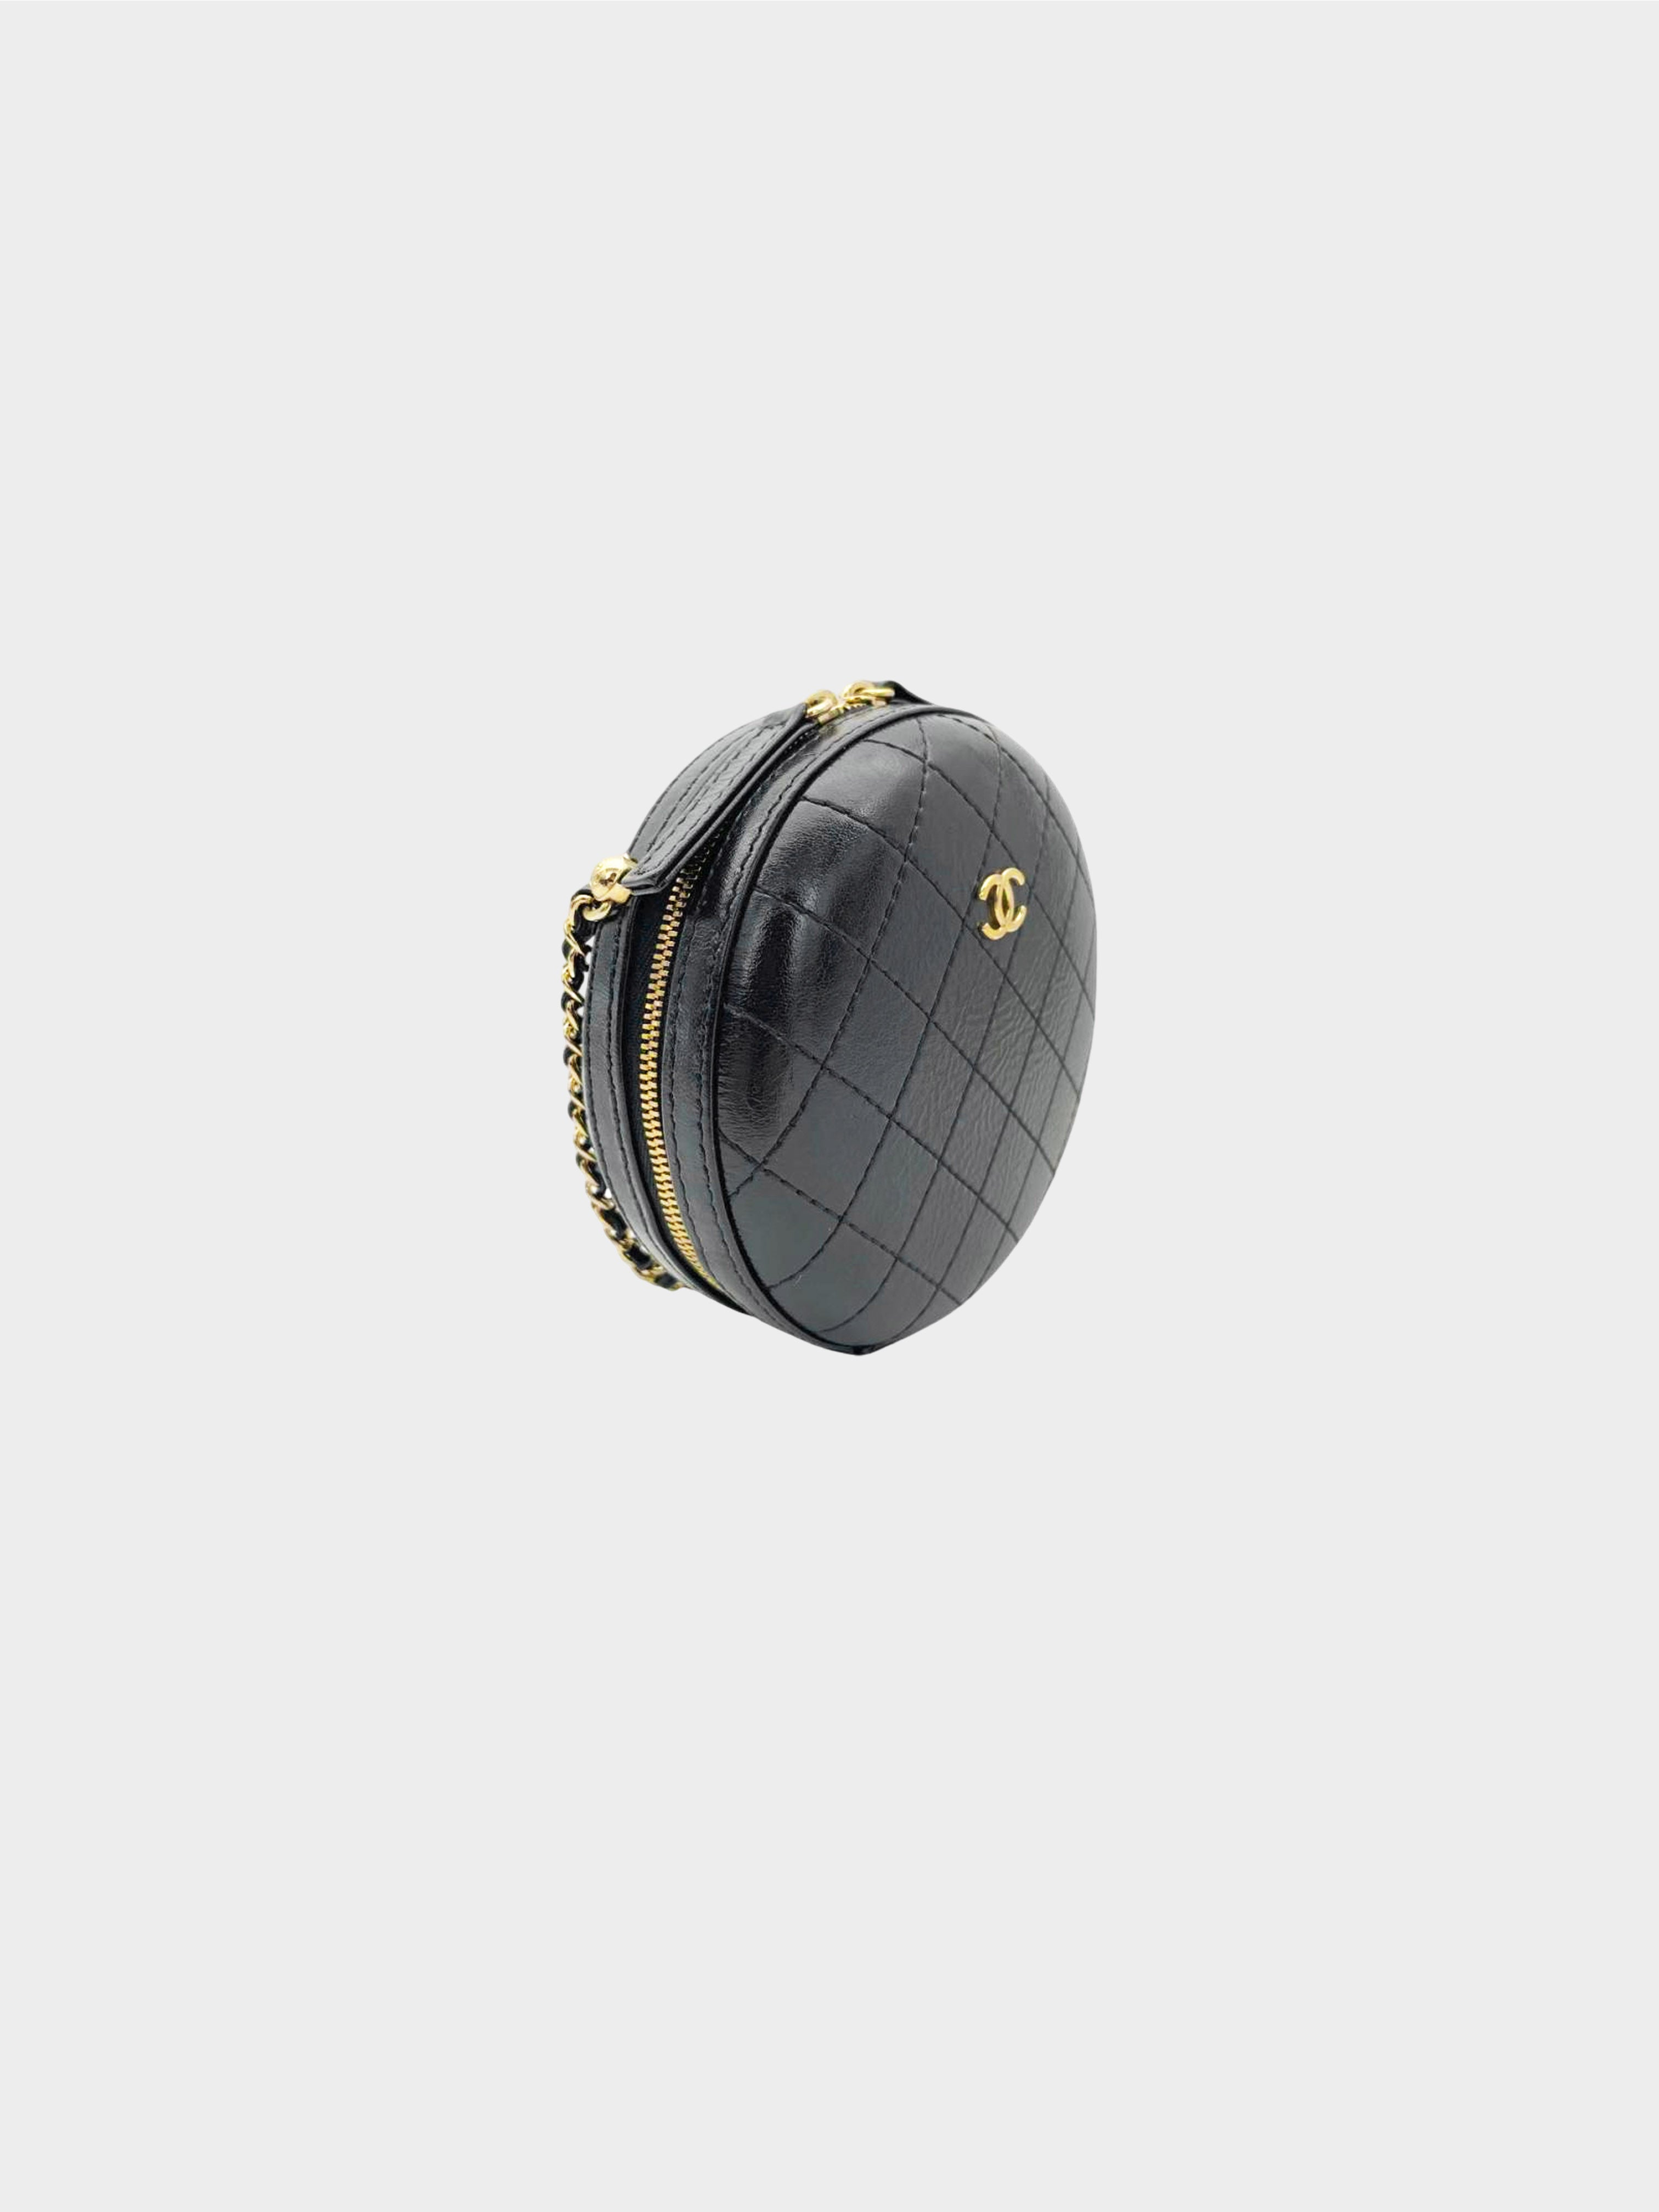 Chanel 2019 Black Quilted Round Leather Bag